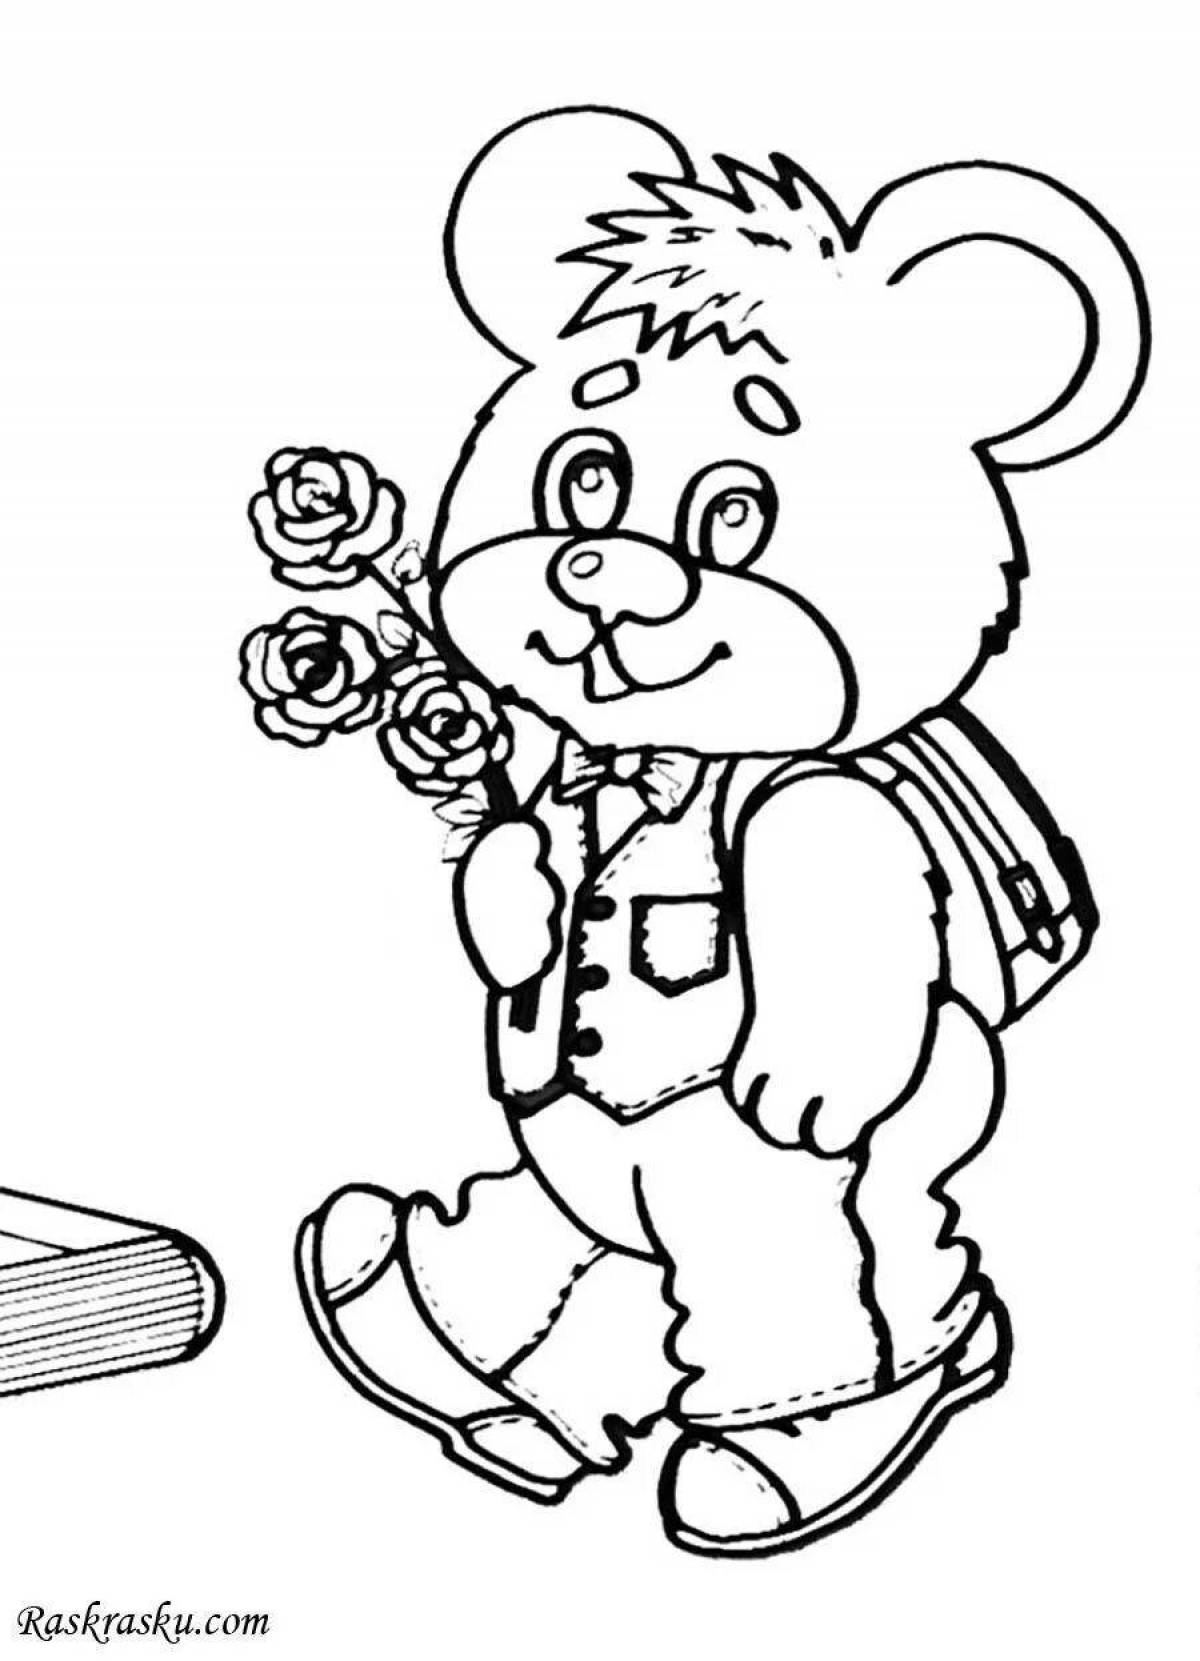 Coloring page glorious first grader september 1st